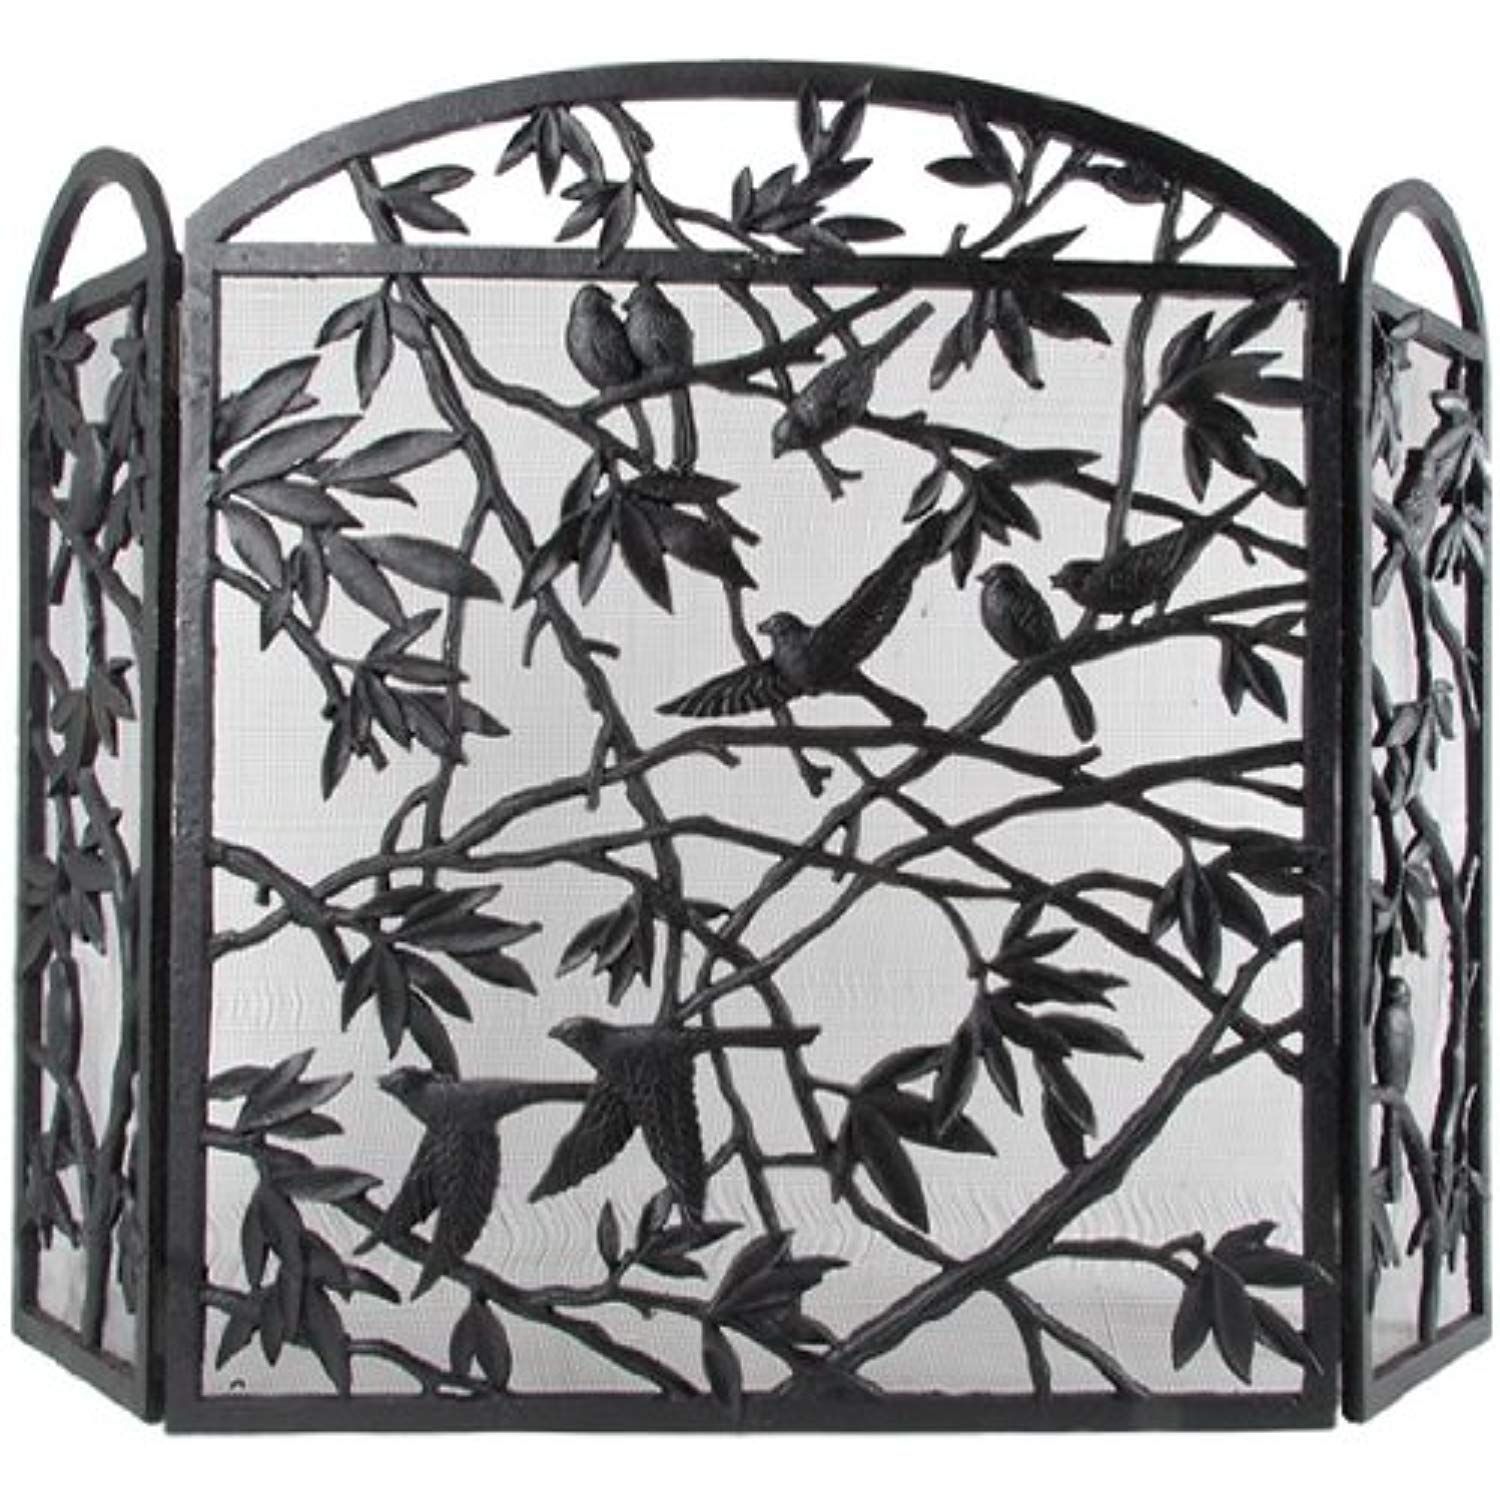 Hanging Fireplace Screen Awesome Nach Fireplace Screen Bird Design Check Out the Image by